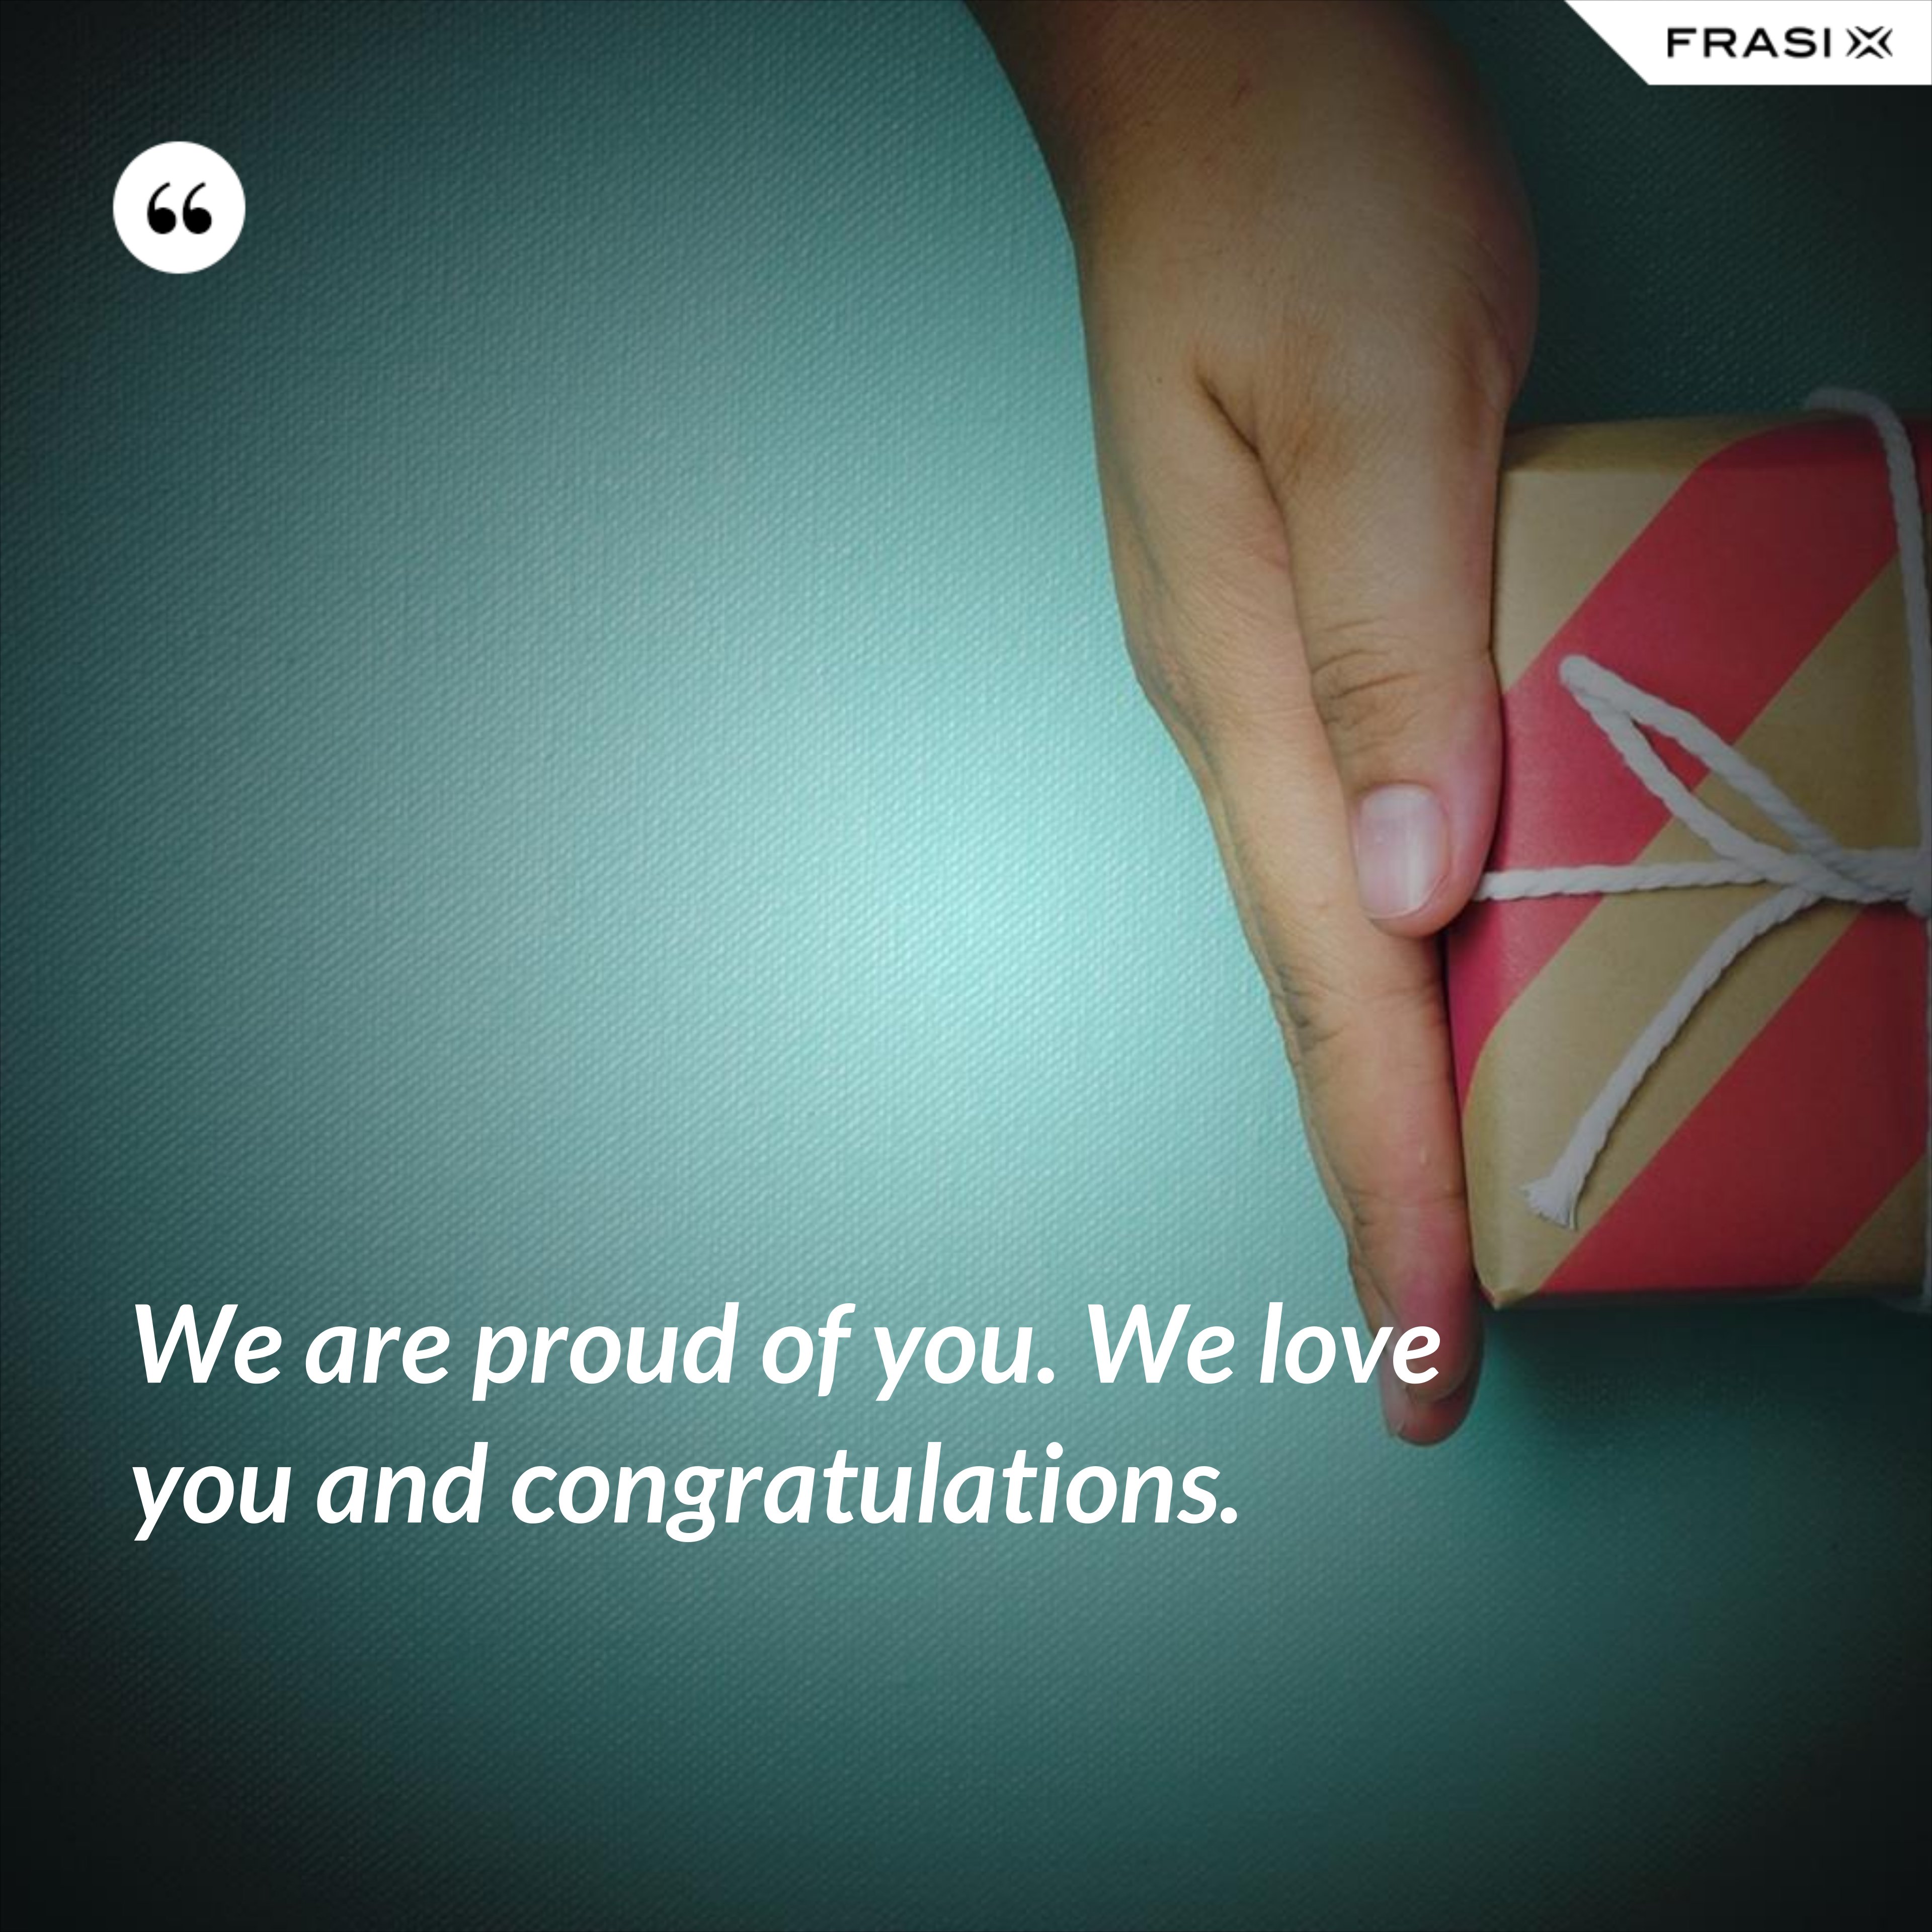 We are proud of you. We love you and congratulations. - Anonimo